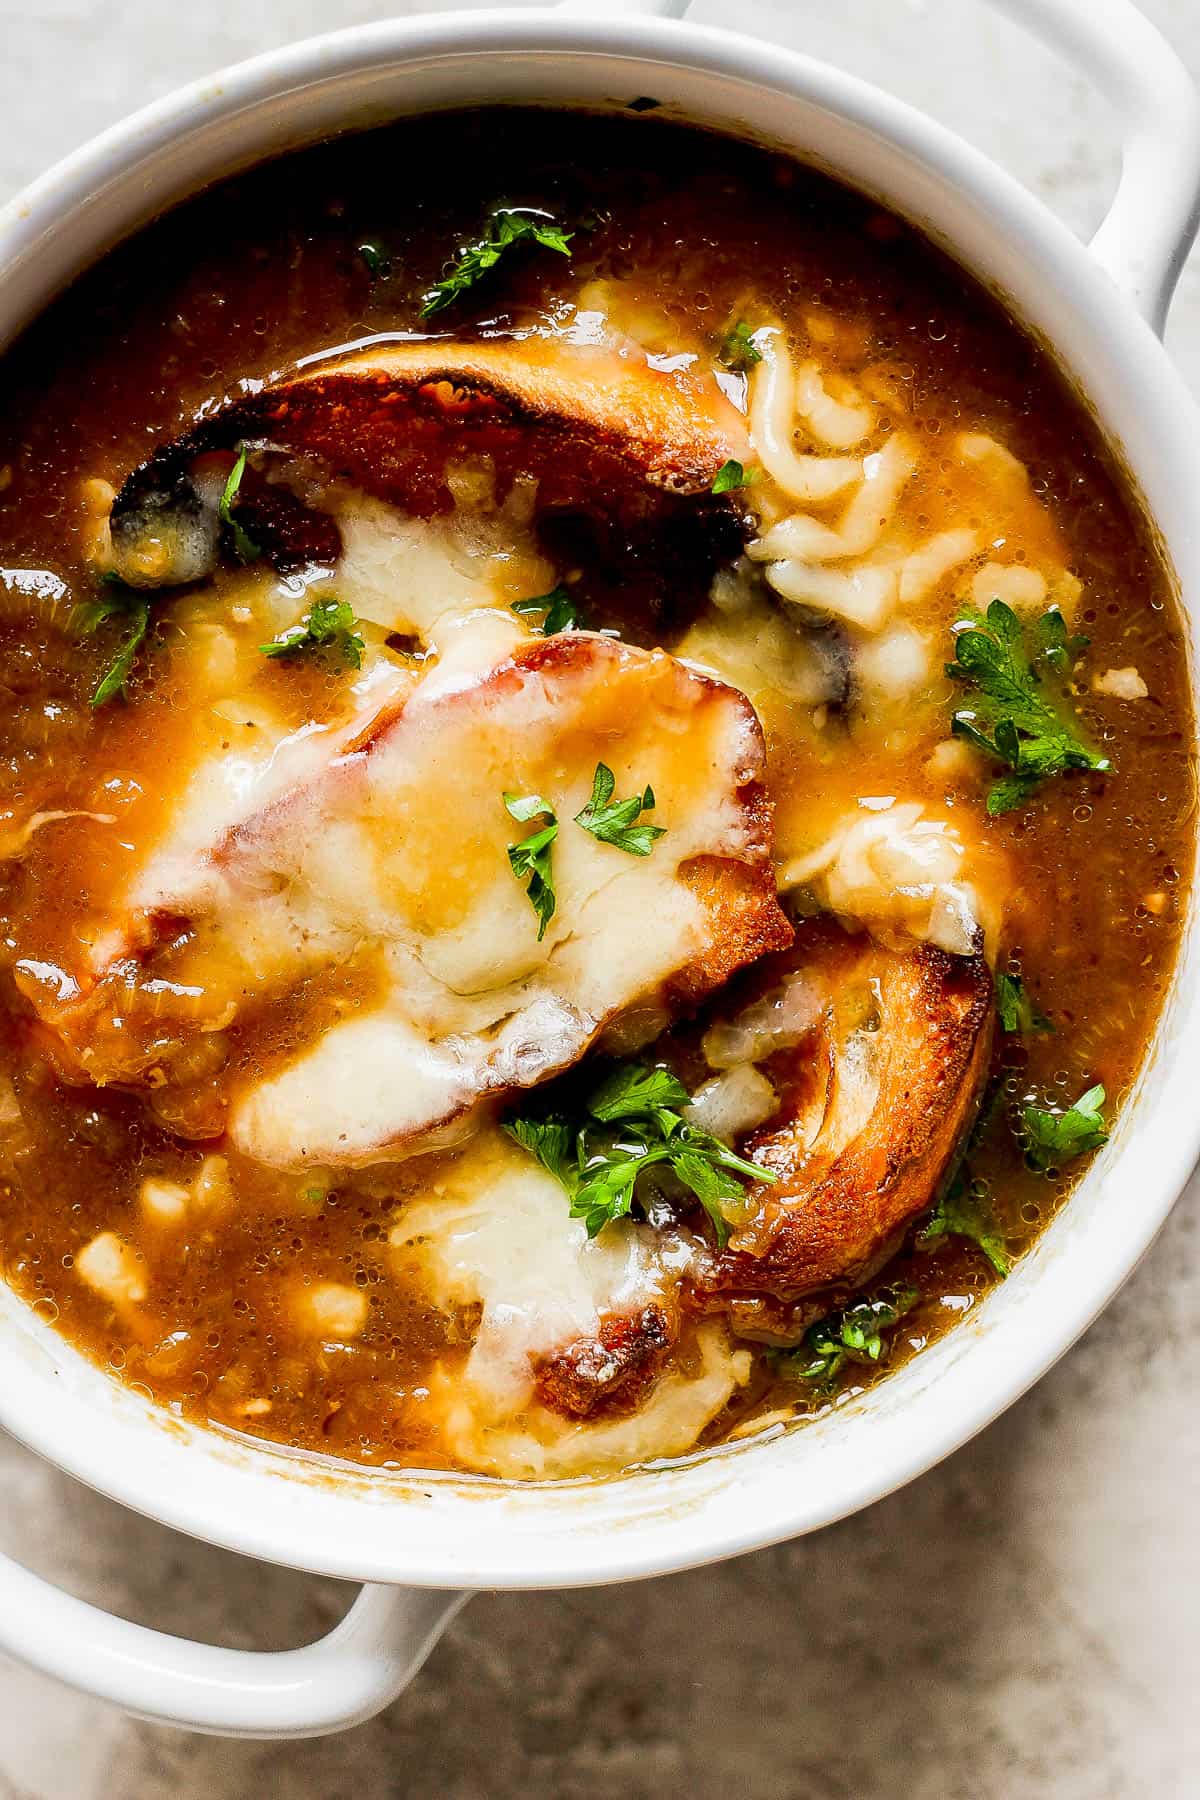 French onion soup in a bowl garnished with fresh parsley.